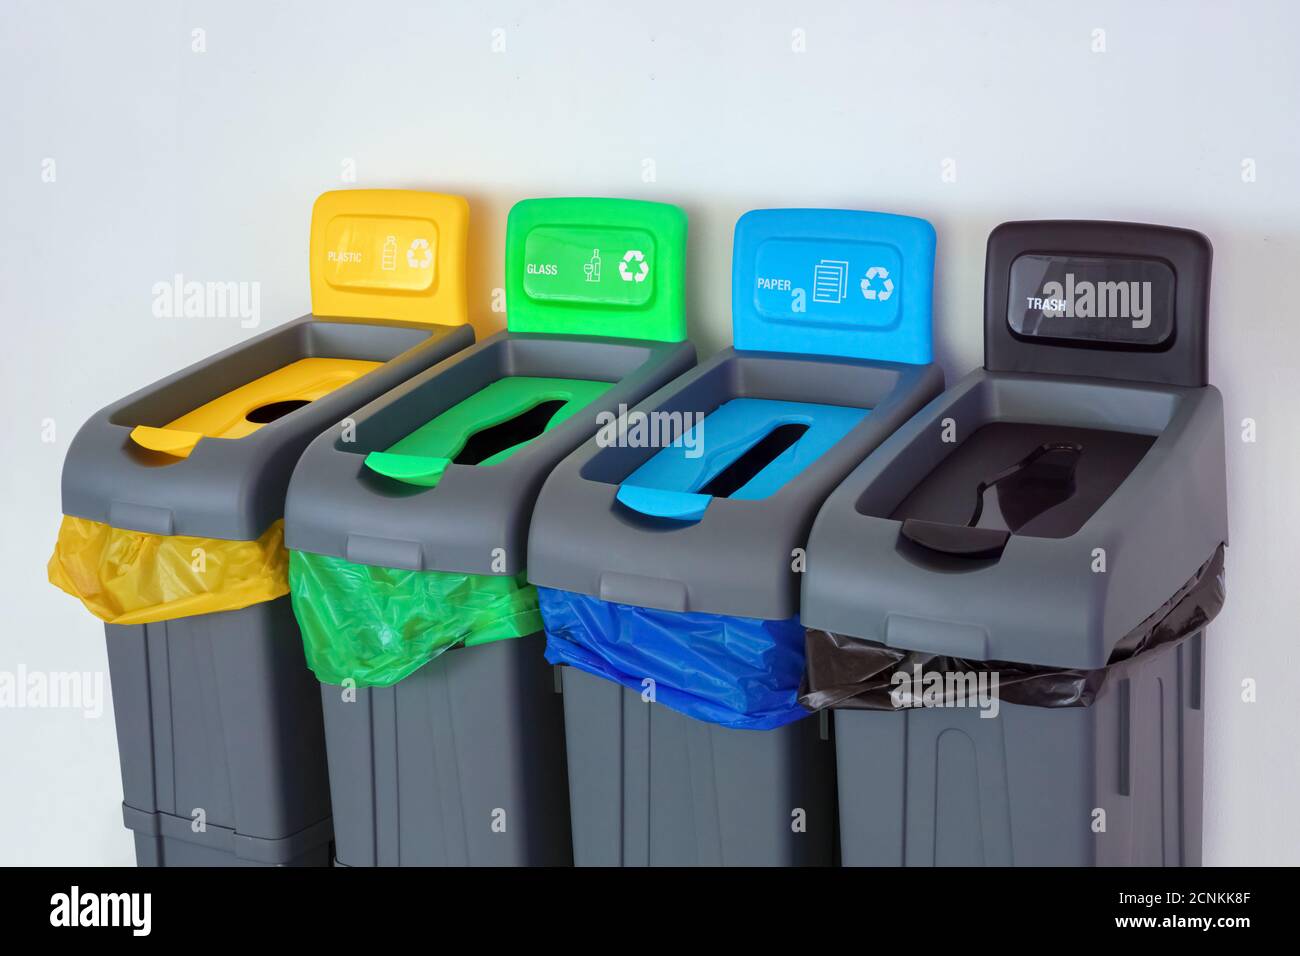 https://c8.alamy.com/comp/2CNKK8F/greenyellow-redblue-color-plastic-garbage-recycle-bin-in-public-place-background-of-trash-paper-glass-and-plastic-waste-garbage-garbage-can-bin-2CNKK8F.jpg